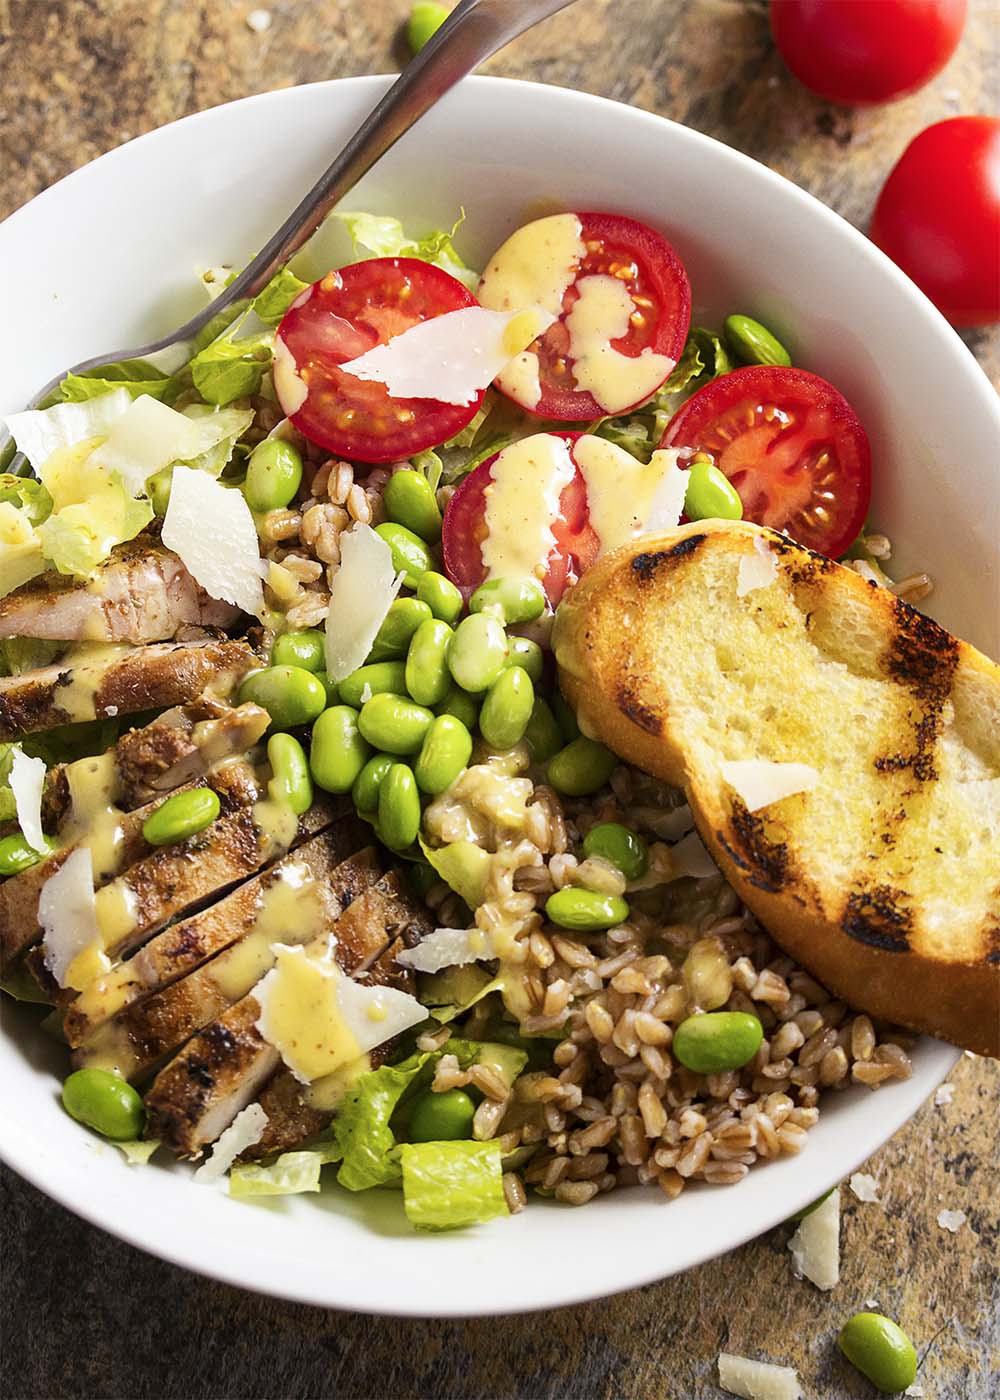 Caesar salad becomes satisfying meal in a bowl with the addition of spicy grilled chicken thighs, farro, tomatoes, and edamame. | justalittlebitofbacon.com